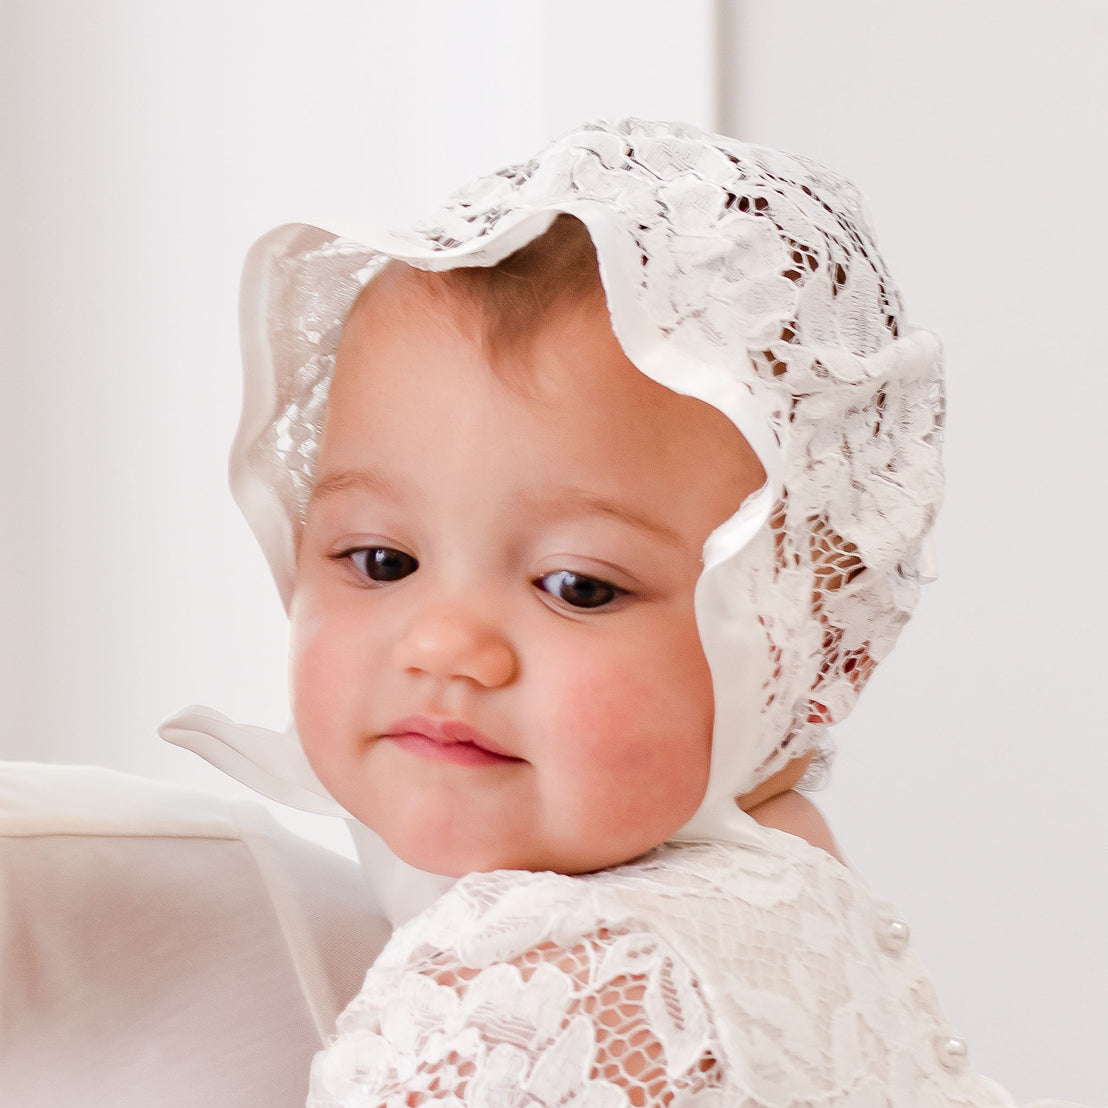 A close-up of a baby wearing a Rose Lace Bonnet and dress with a thoughtful expression, set against a soft white background.